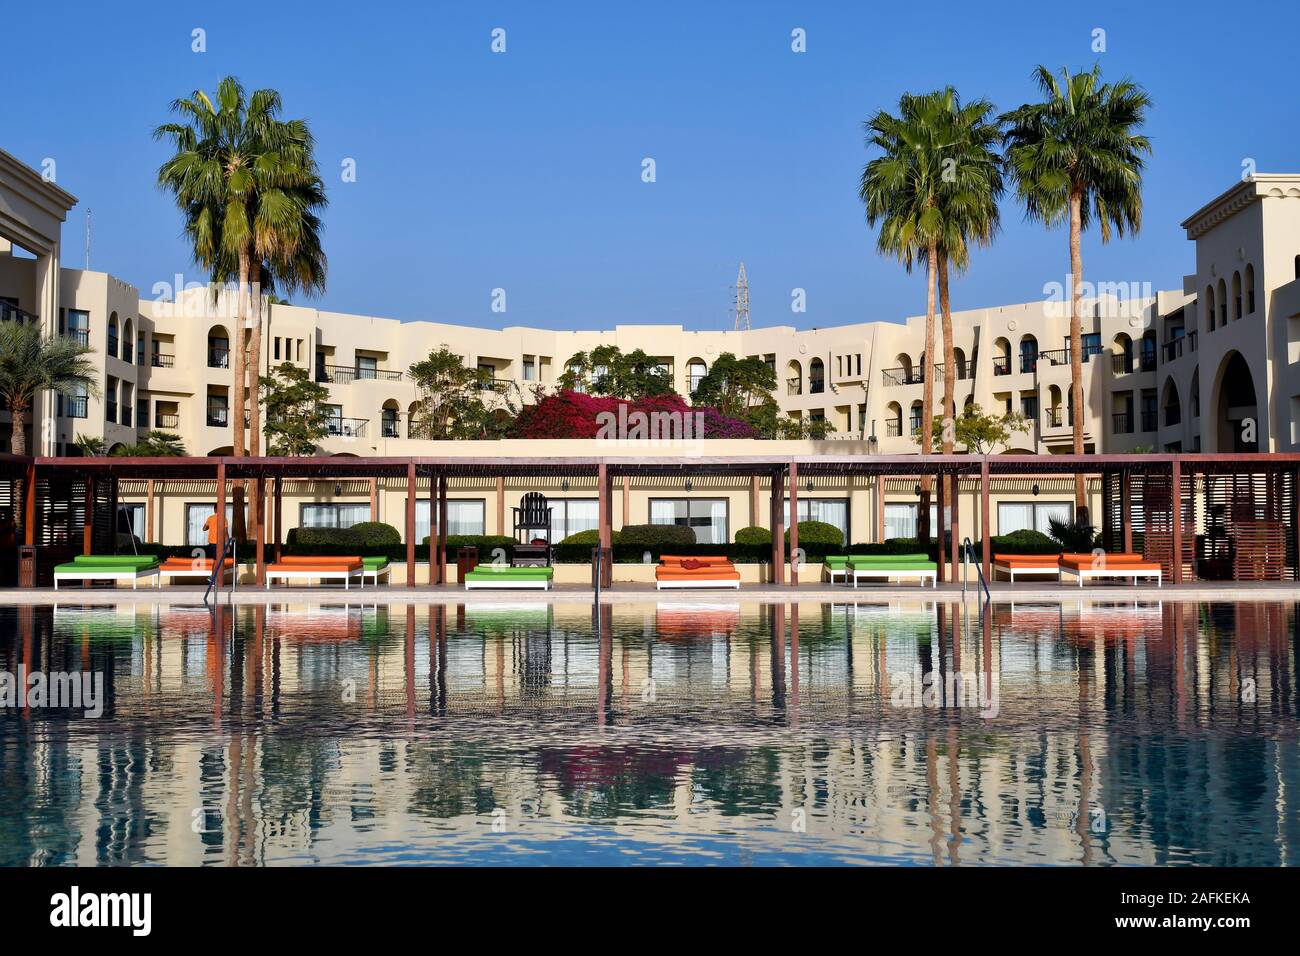 Aqaba, Jordan - March 04, 2019: Tala Bay hotel complex with pool and sun beds, situated on Red Sea Stock Photo